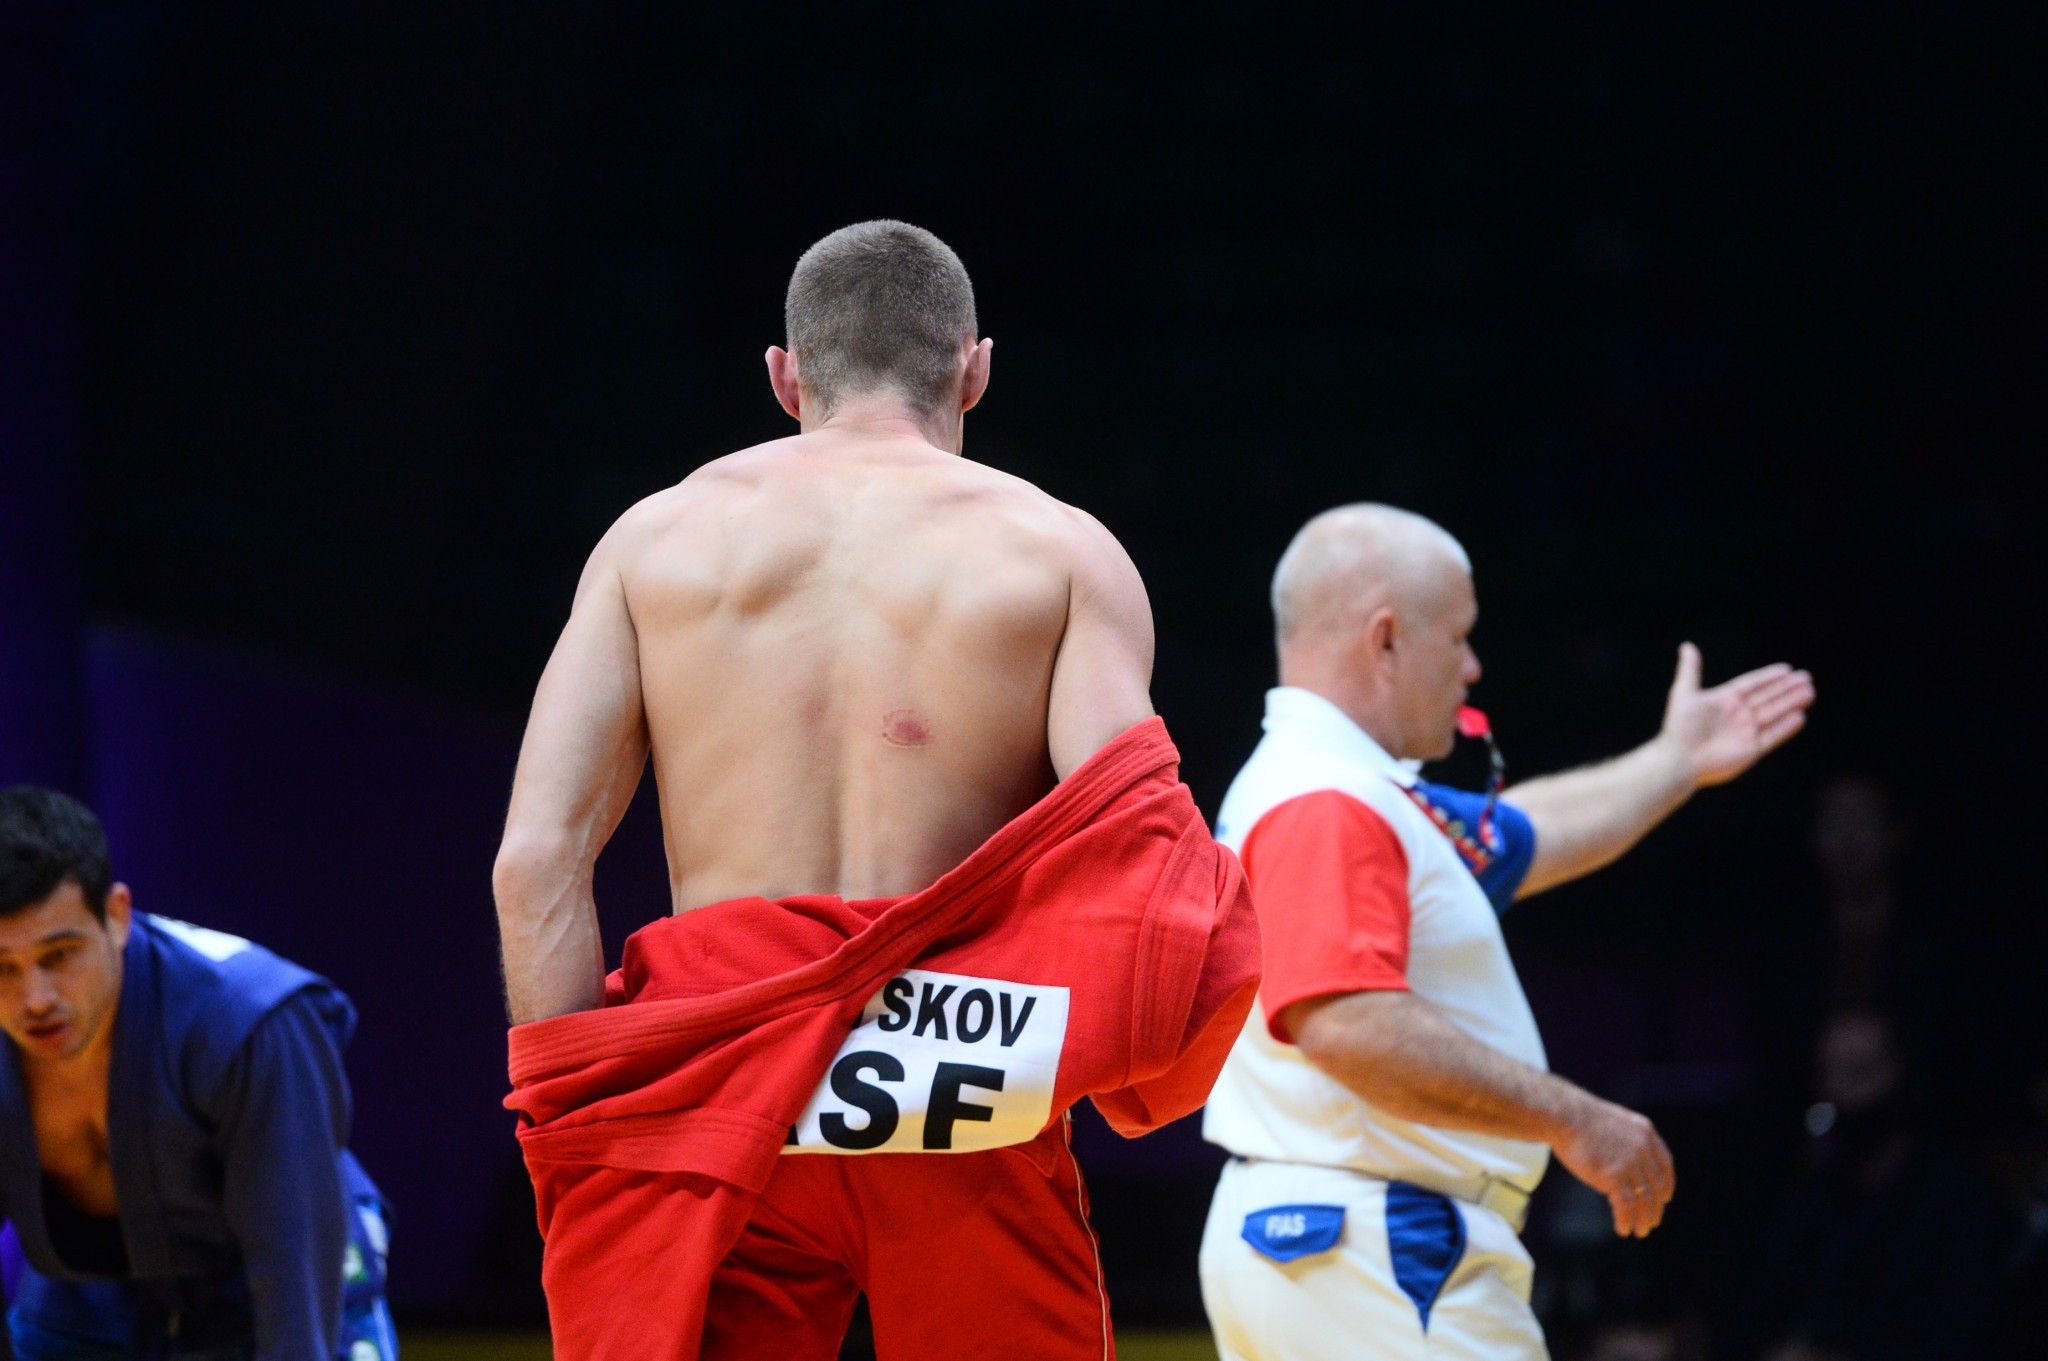 Nikita Kletskov takes off his uniform to show what appears to be a bite mark on his back ©FIAS